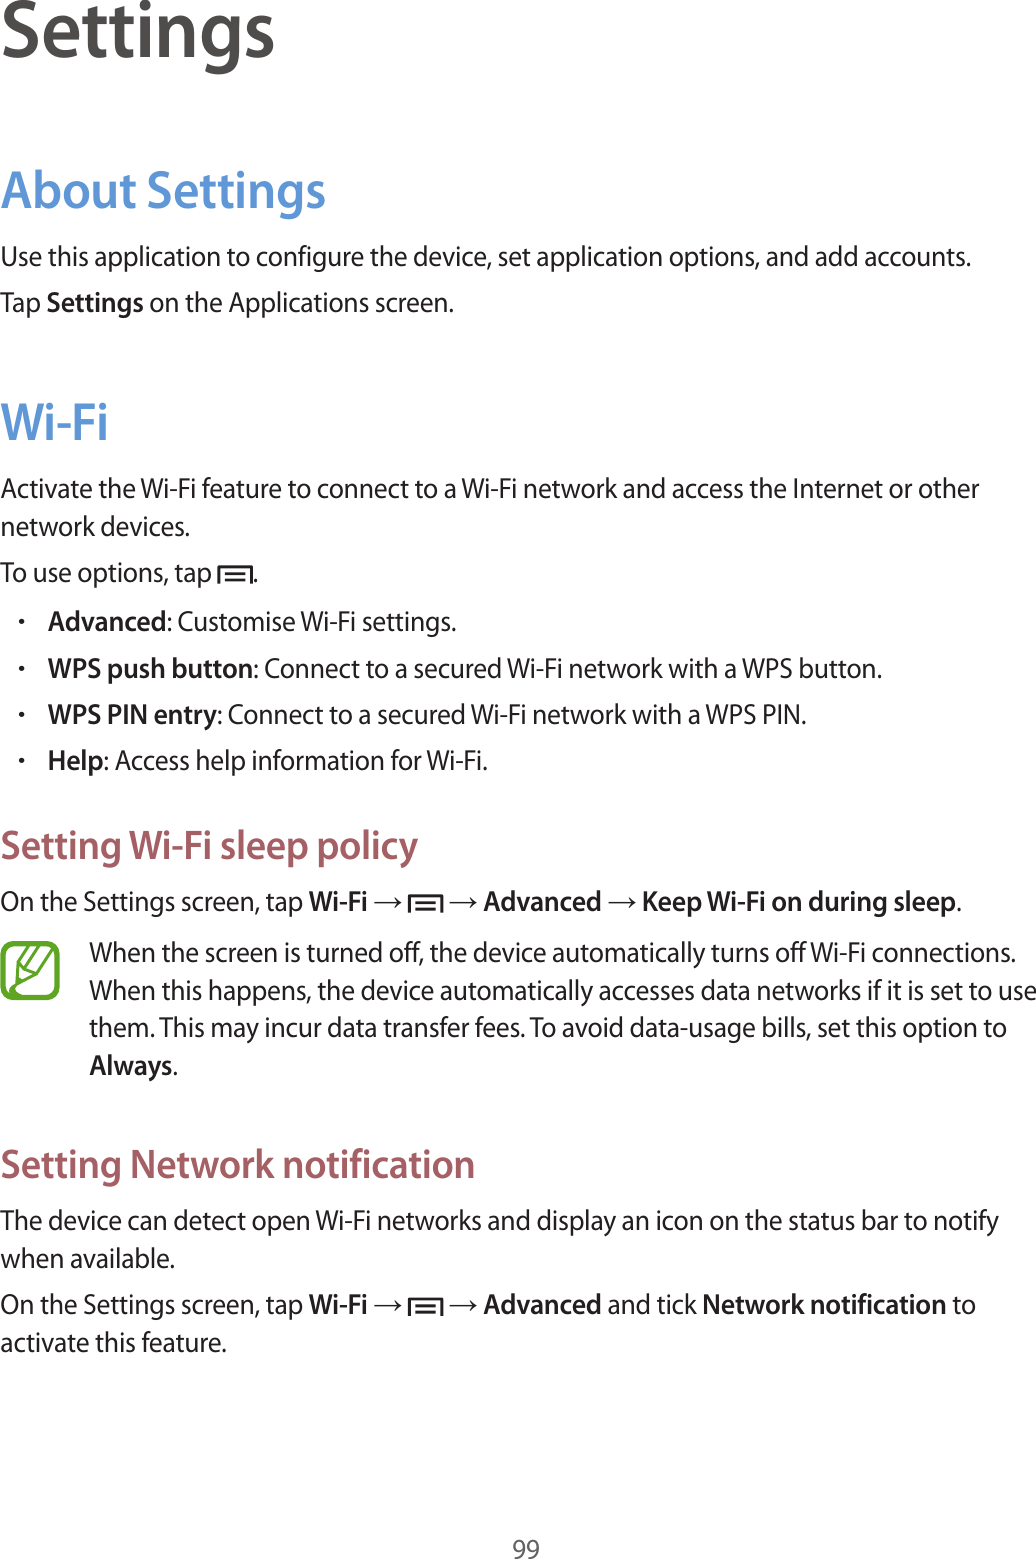 99SettingsAbout SettingsUse this application to configure the device, set application options, and add accounts.Tap Settings on the Applications screen.Wi-FiActivate the Wi-Fi feature to connect to a Wi-Fi network and access the Internet or other network devices.To use options, tap  .•Advanced: Customise Wi-Fi settings.•WPS push button: Connect to a secured Wi-Fi network with a WPS button.•WPS PIN entry: Connect to a secured Wi-Fi network with a WPS PIN.•Help: Access help information for Wi-Fi.Setting Wi-Fi sleep policyOn the Settings screen, tap Wi-Fi →   → Advanced → Keep Wi-Fi on during sleep.When the screen is turned off, the device automatically turns off Wi-Fi connections. When this happens, the device automatically accesses data networks if it is set to use them. This may incur data transfer fees. To avoid data-usage bills, set this option to Always.Setting Network notificationThe device can detect open Wi-Fi networks and display an icon on the status bar to notify when available.On the Settings screen, tap Wi-Fi →   → Advanced and tick Network notification to activate this feature.